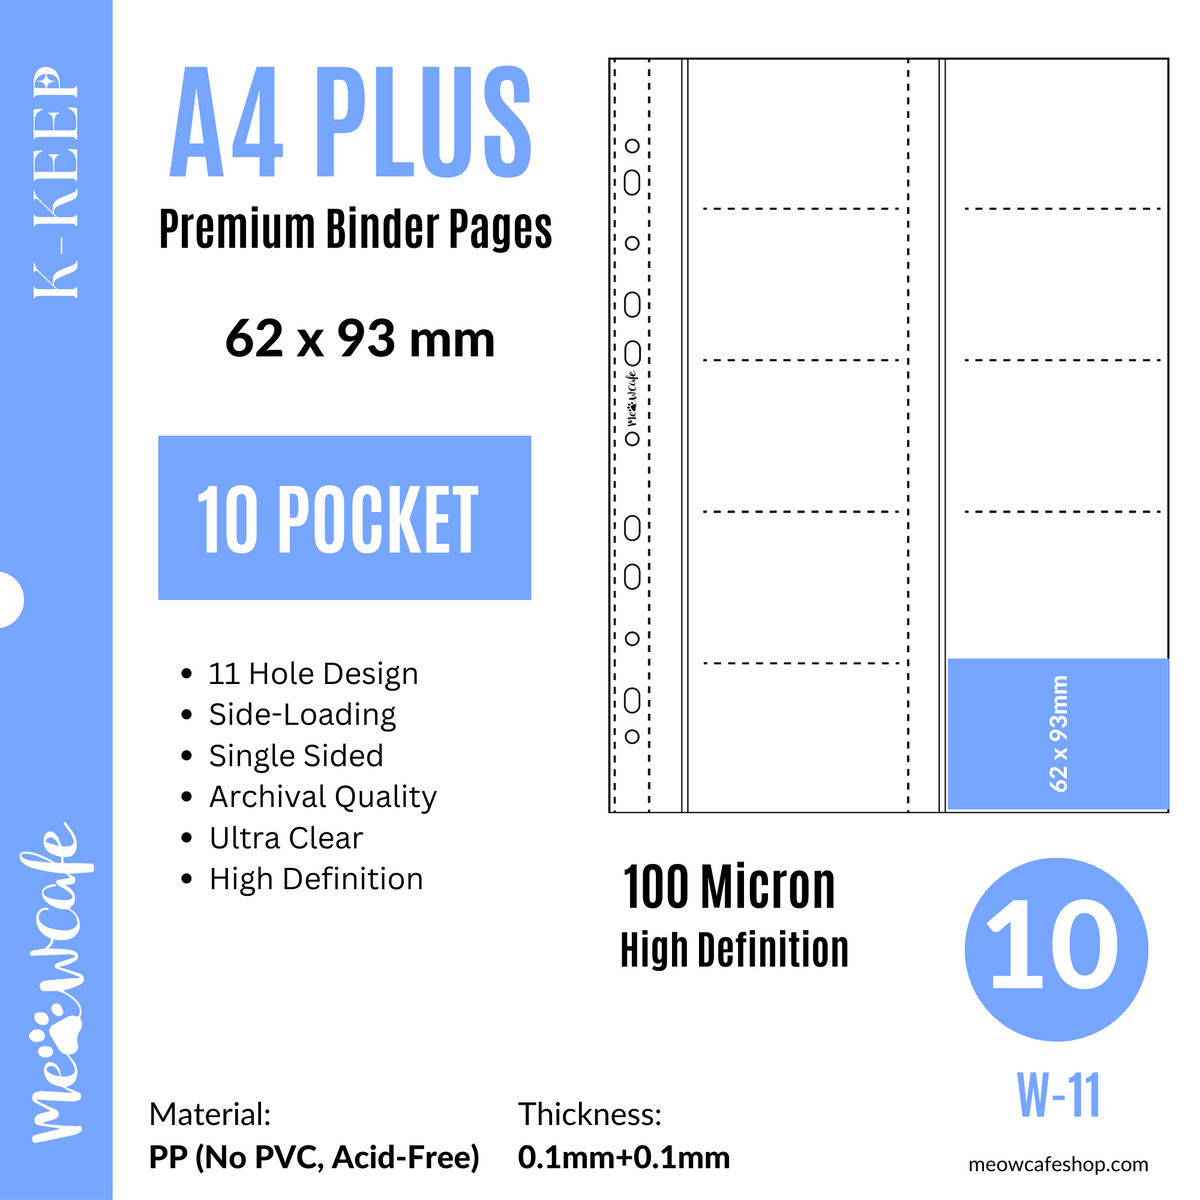 (New Version W-21 Available, W-11 is not Restocked, Read Description for link to W-21) K-KEEP [A4 PLUS] - 10 Pocket 62x93mm - 11 Holes Premium Binder Pages, 100 Micron Thick, High Definition (Pack of 10) - (W-11)